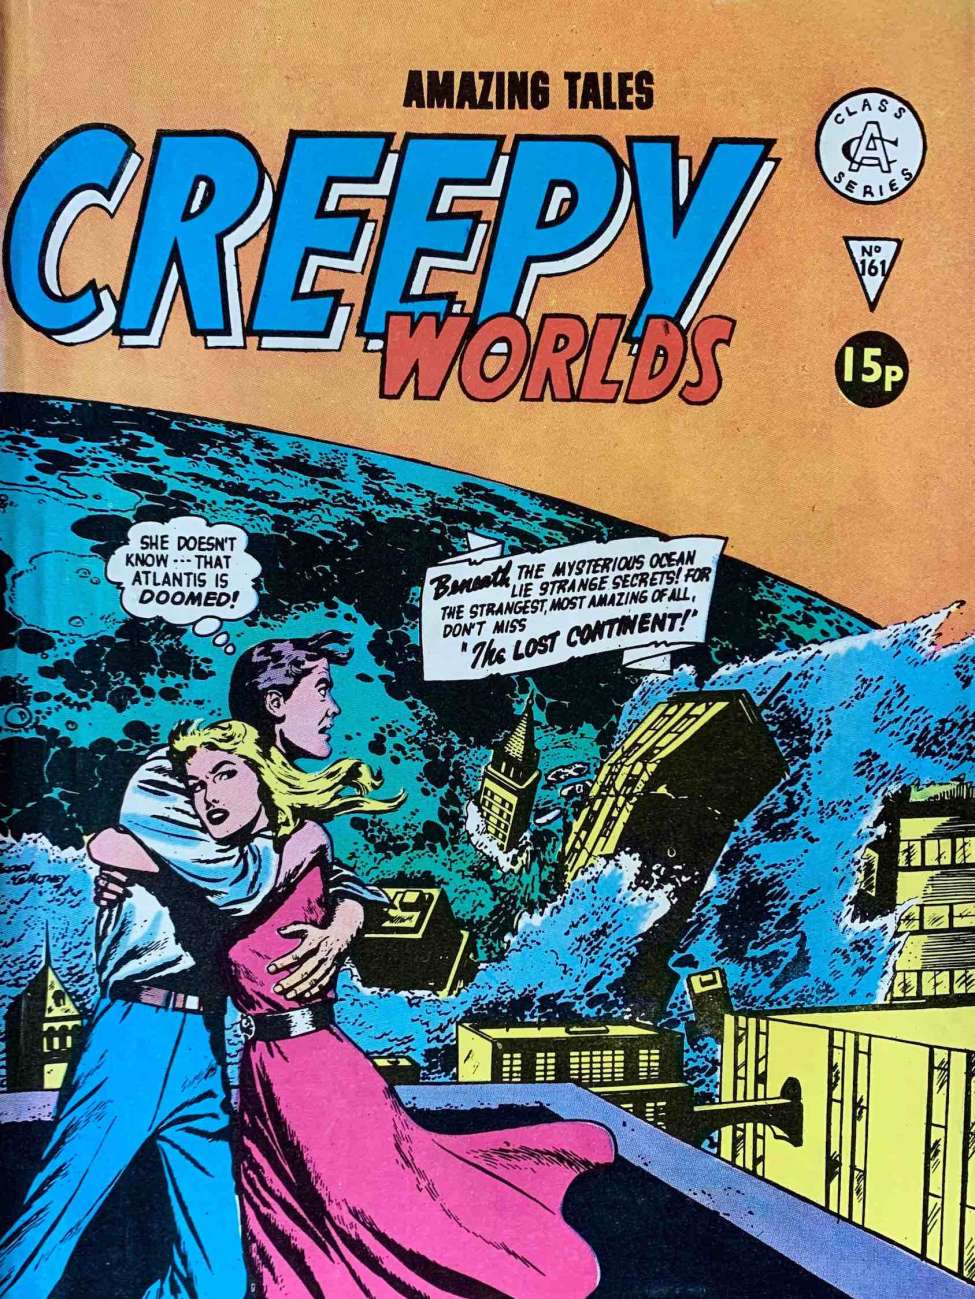 Book Cover For Creepy Worlds 161